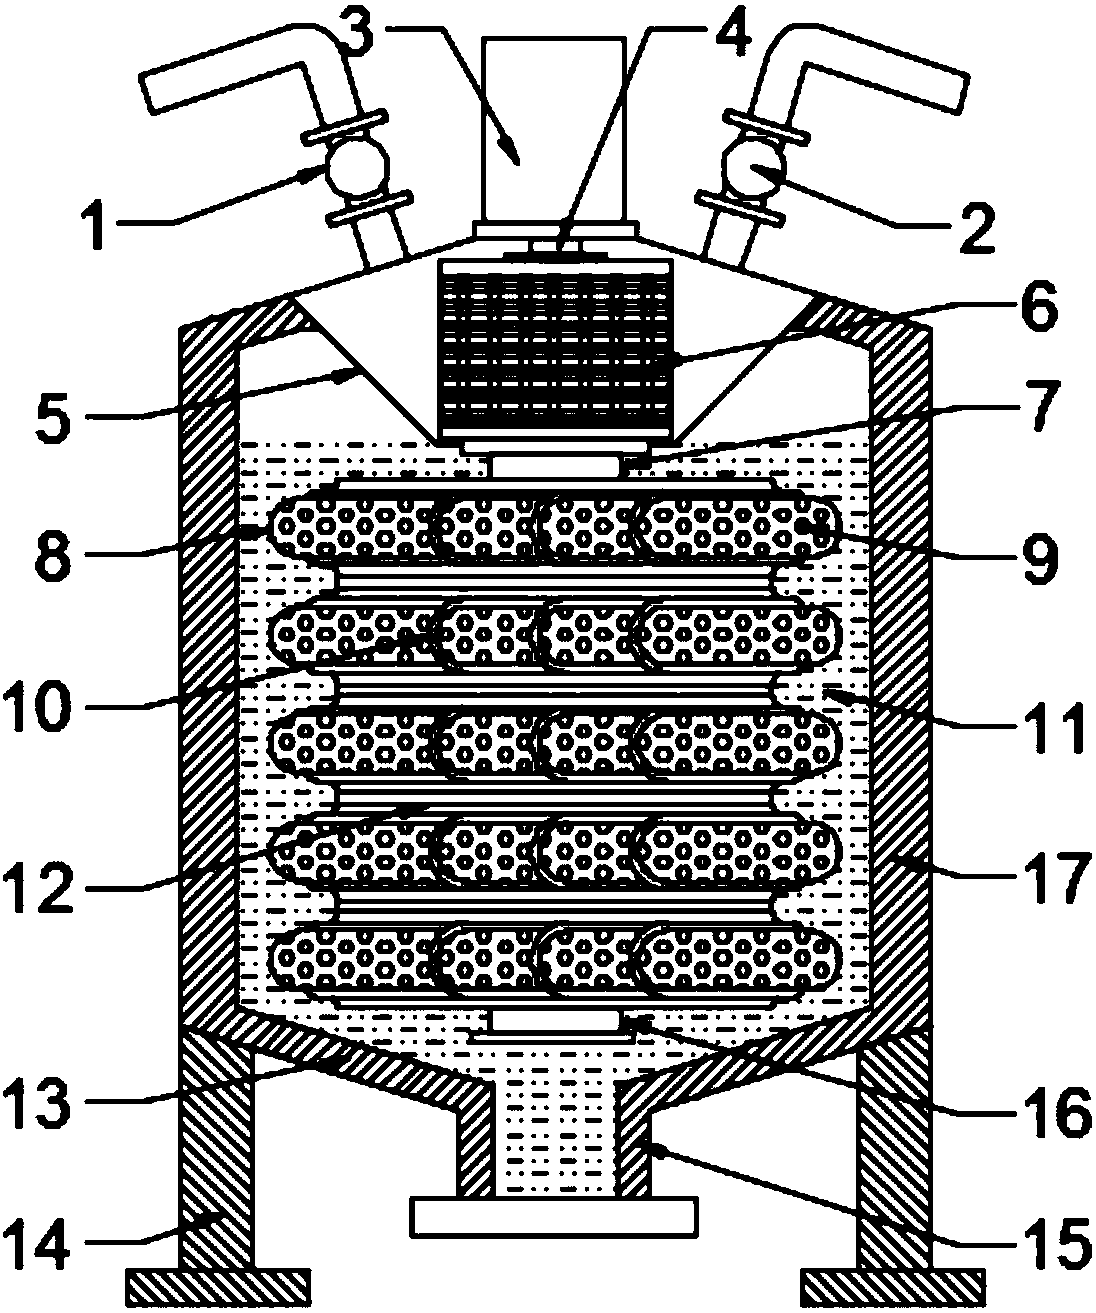 Liquid double-mixing liquid-mixing device for chemical production